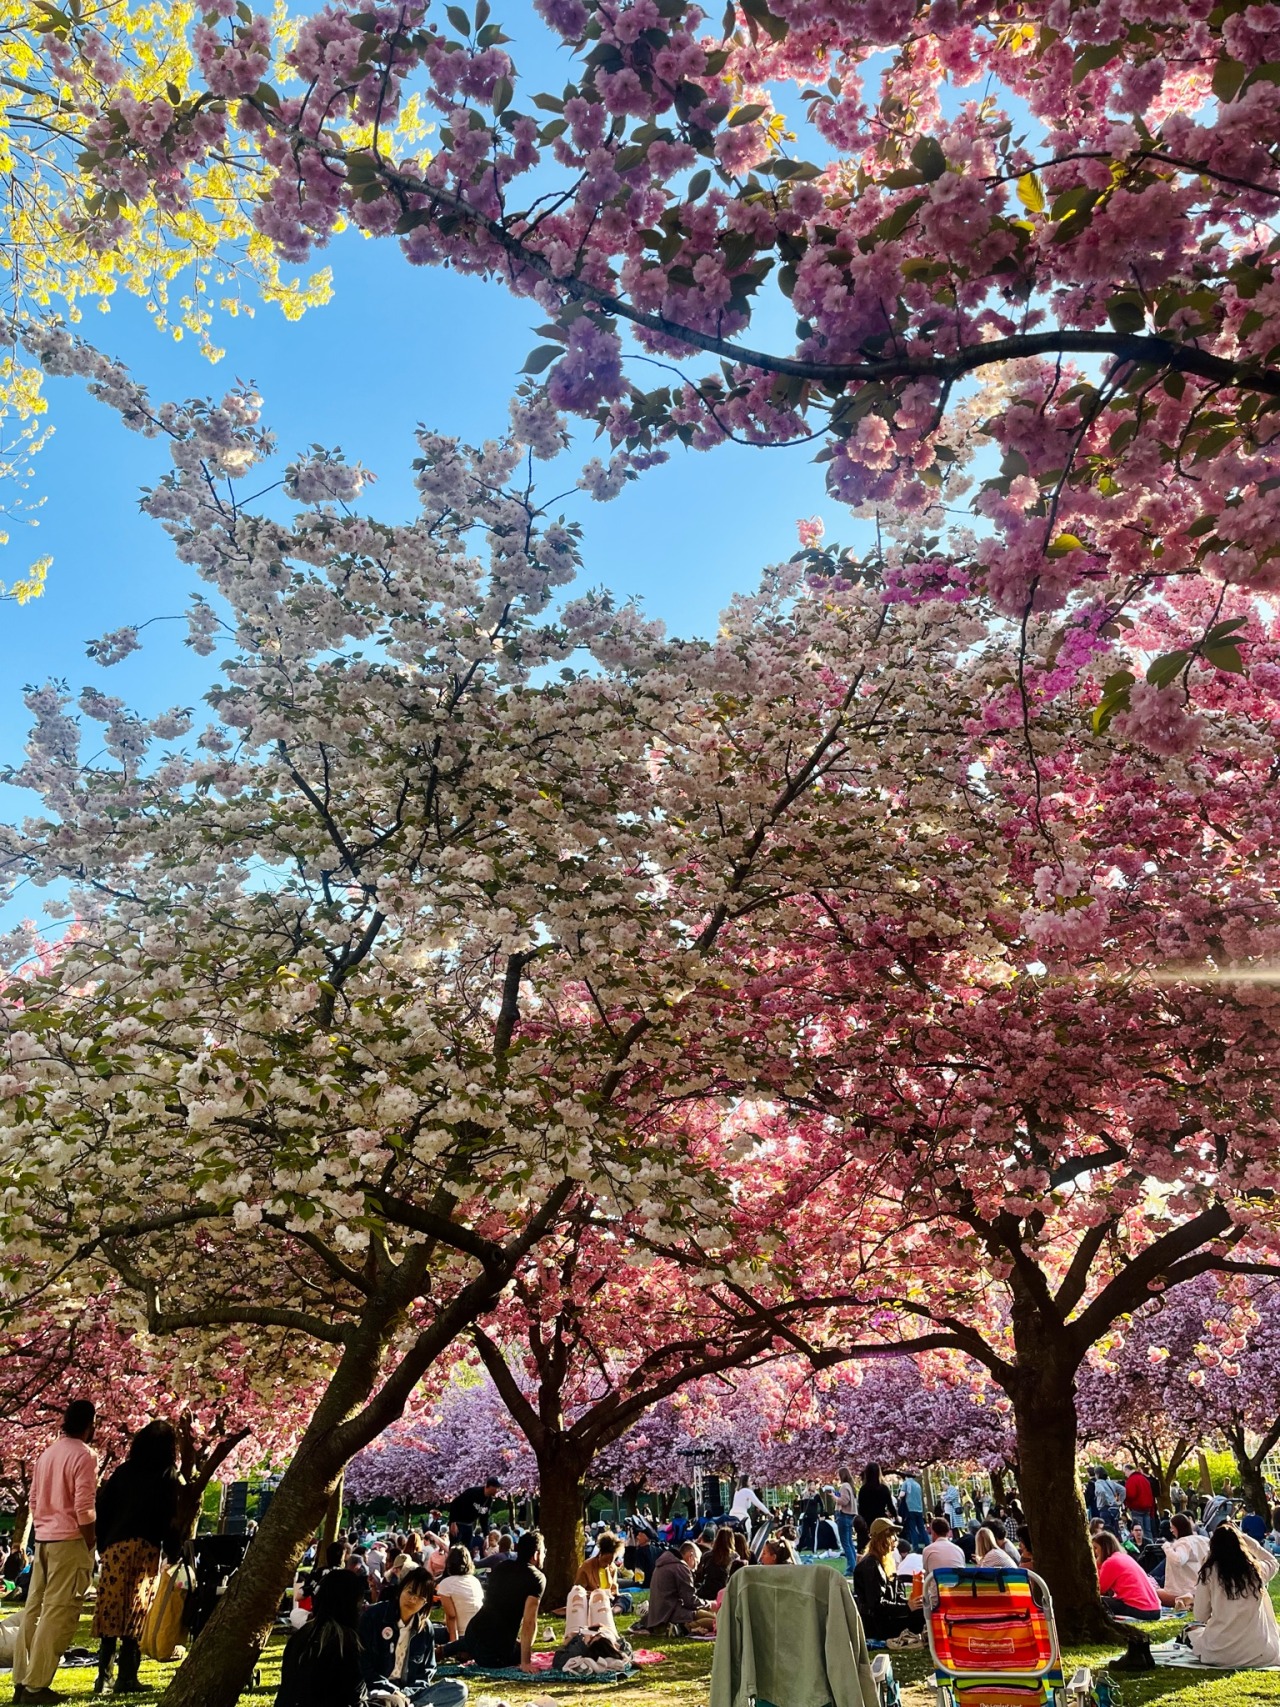 two cherry trees in full bloom. the tree on the right is pale pink while the tree on the left has white blooms. dozens of people on picnic blankets are sitting underneath, and a line of cherry trees in full bloom is in the background